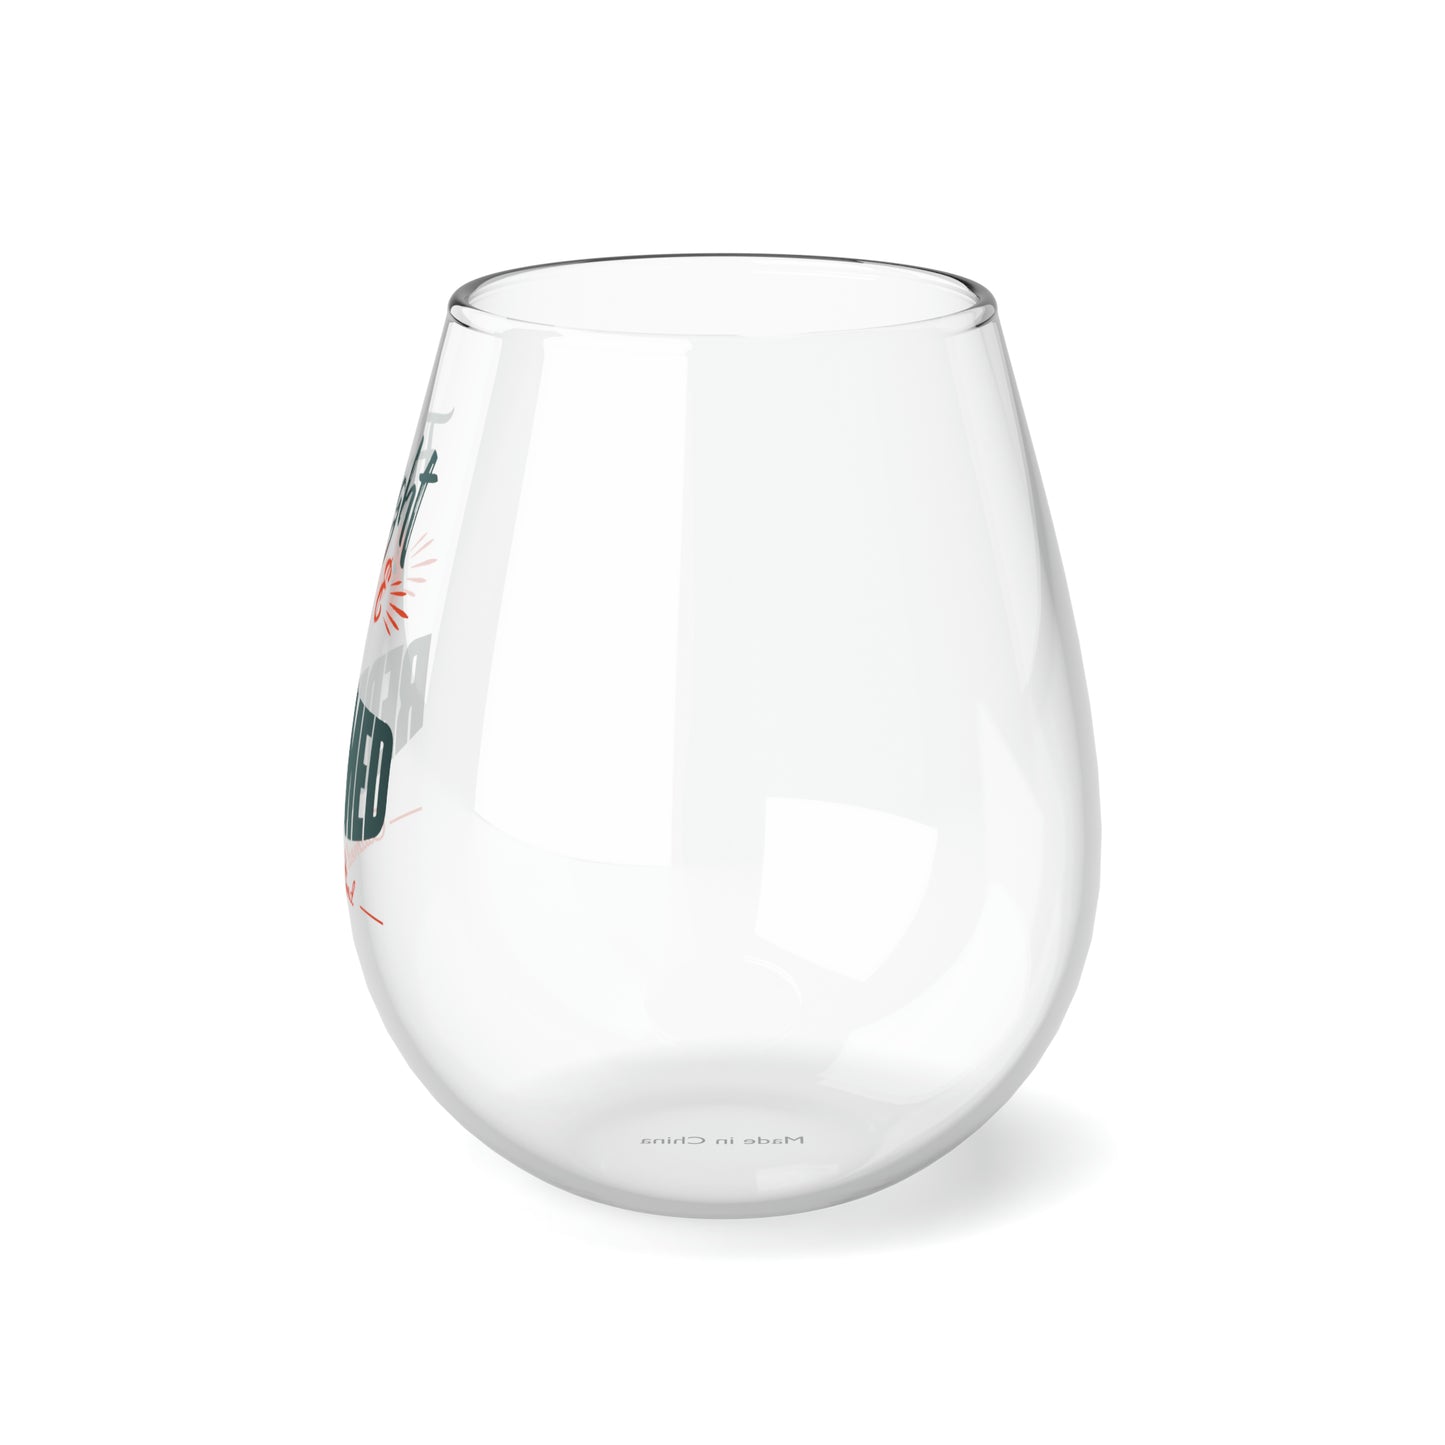 Fought For & Redeemed Stemless Wine Glass, 11.75oz